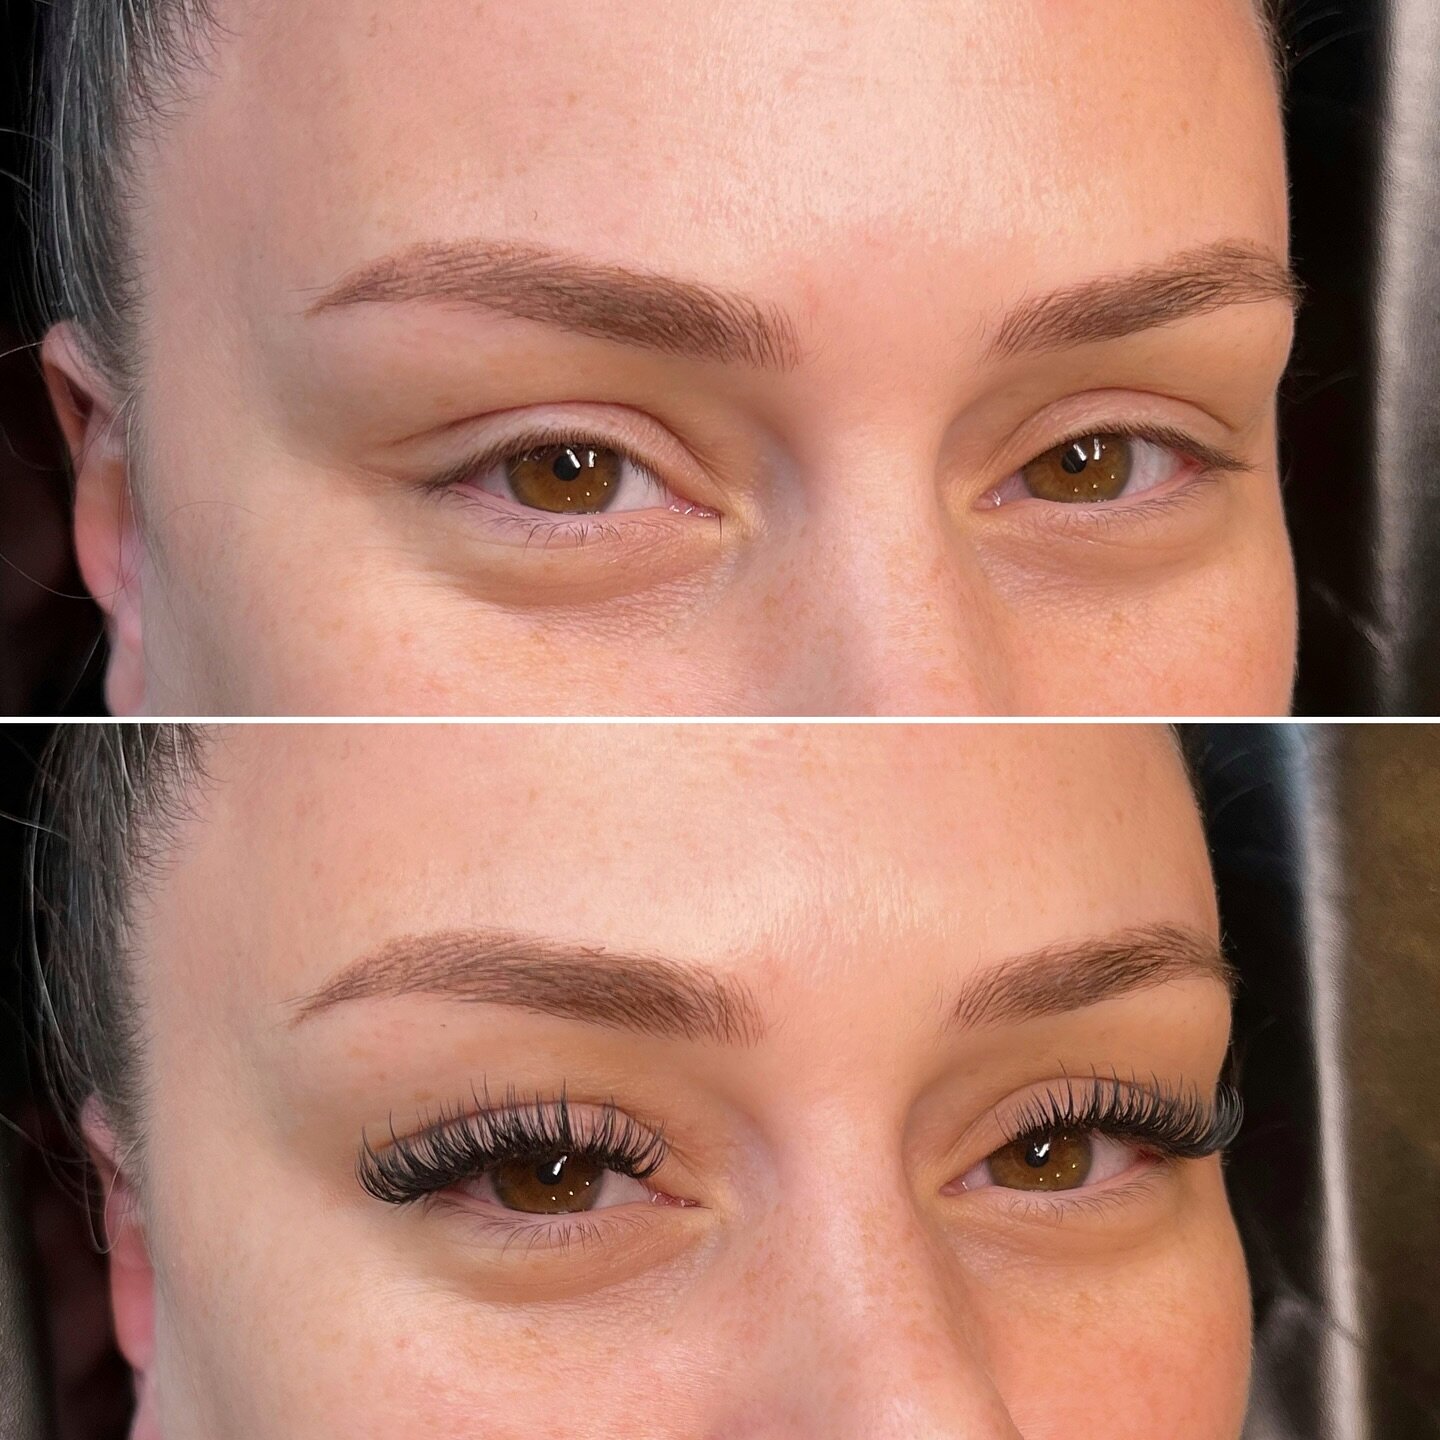 Transforming frames, one arch and lash at a time.✨ Wispy hybrid lashes by Thy and Microshading on day seven of healing by Julie. To schedule your appointment visit www.cascadia-ink.com. 🖤

#beautygoals #seattlebrows #puyalluplashes #puyallup #puyall